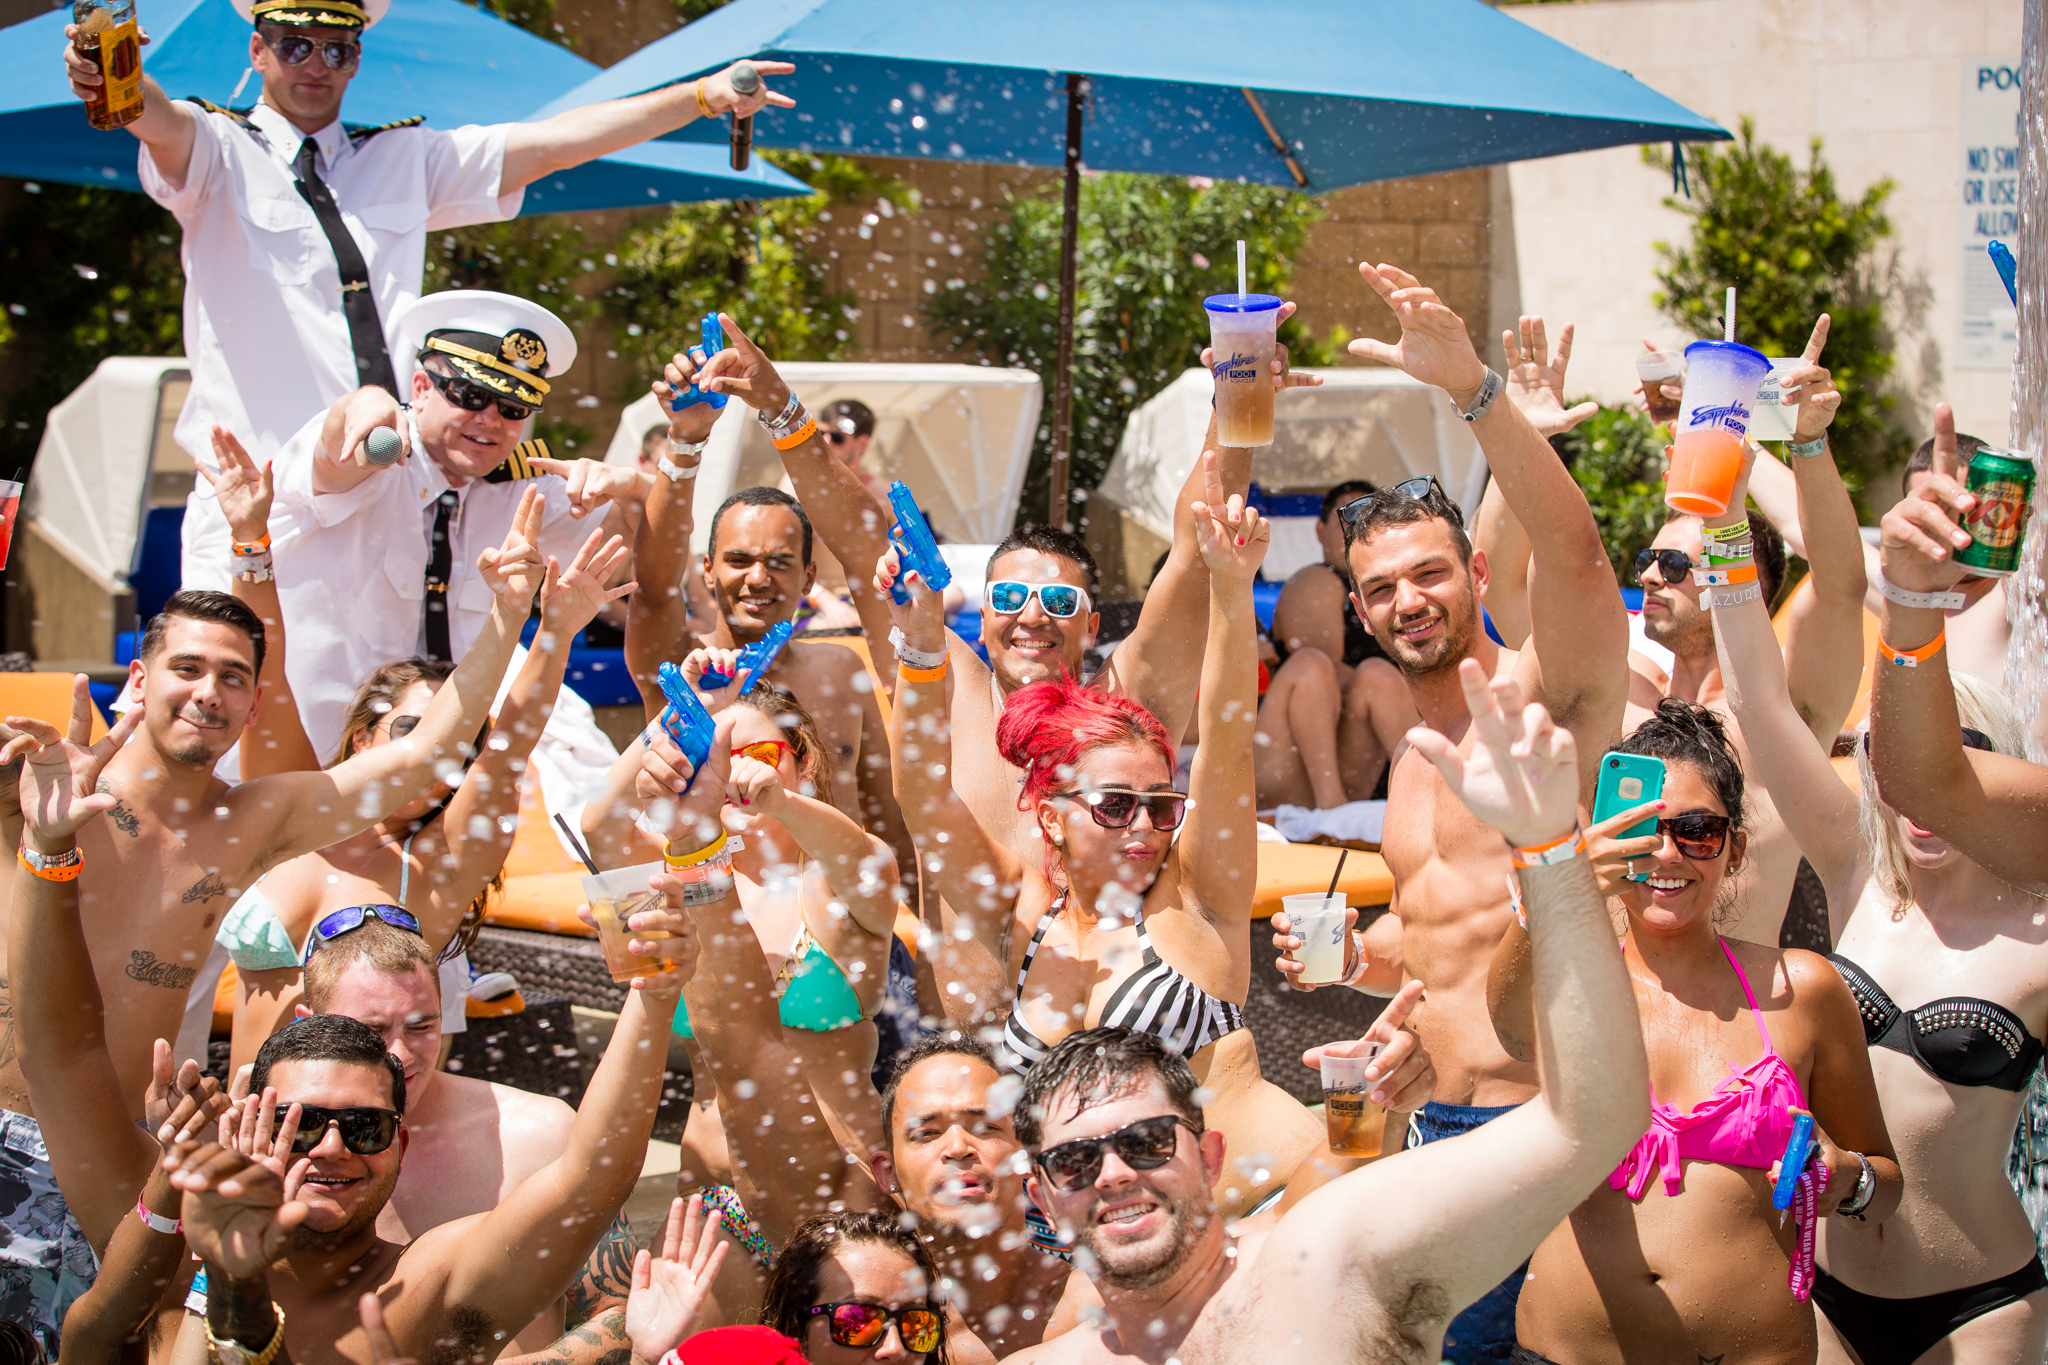 Top 5 Reasons To Do A Vegas Pool Party!